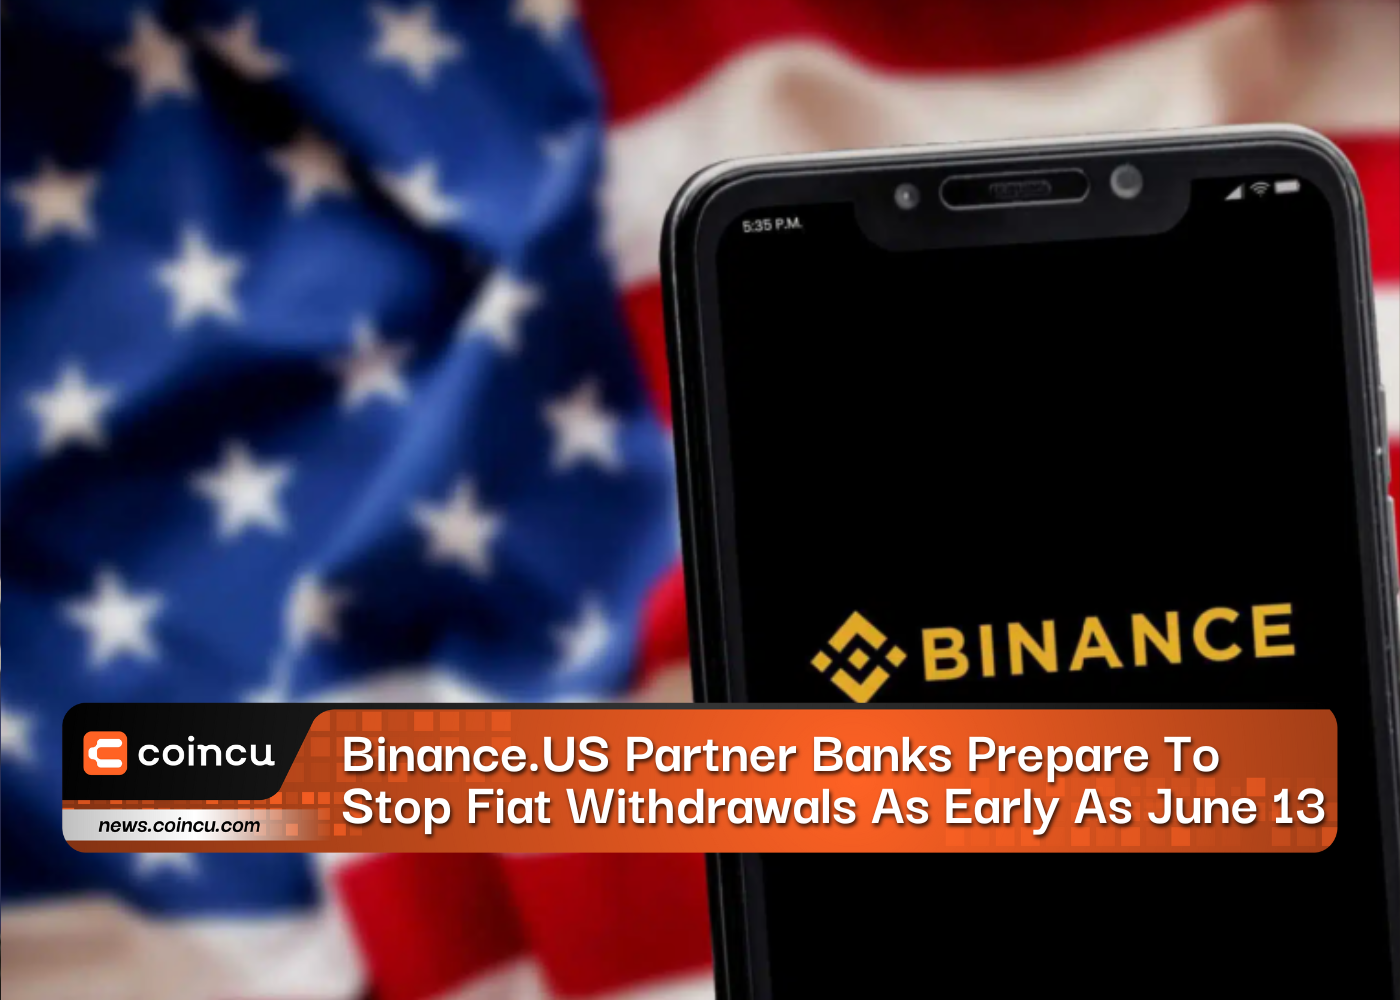 Binance.US Partner Banks Prepare To Stop Fiat Withdrawals As Early As June 13